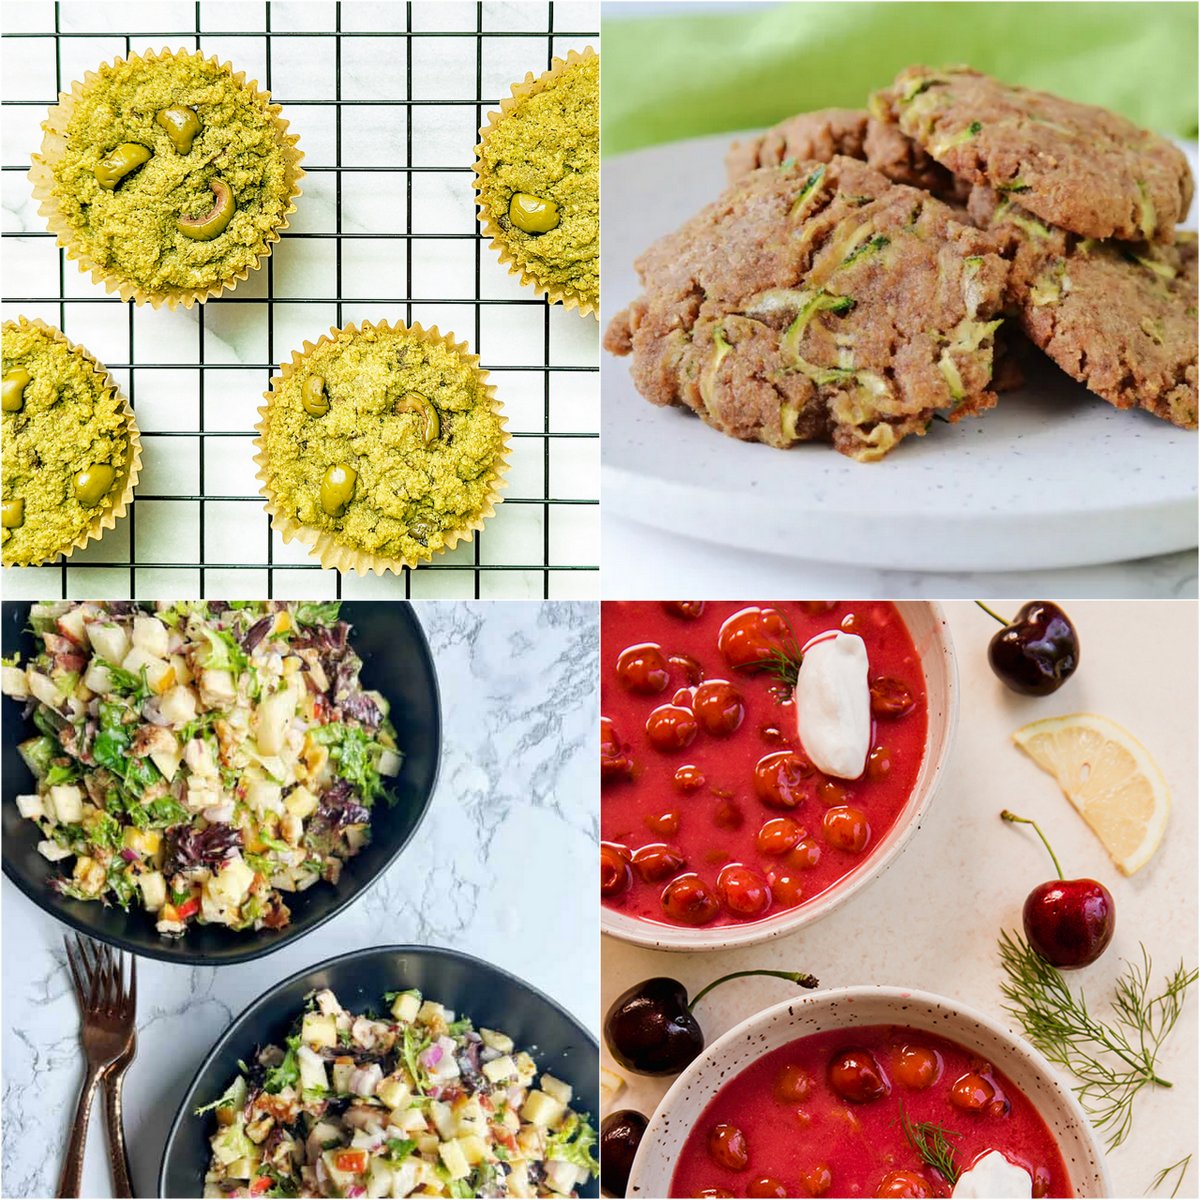 Paleo AIP Recipe Roundtable #412 | Phoenix Helix - *Featured Recipes: Green Olive Basil Muffins, Zucchini Cookies, Hungarian Cold Cherry Soup, and Chopped Chicken & Apple Salad with Sweet Onion Dressing.